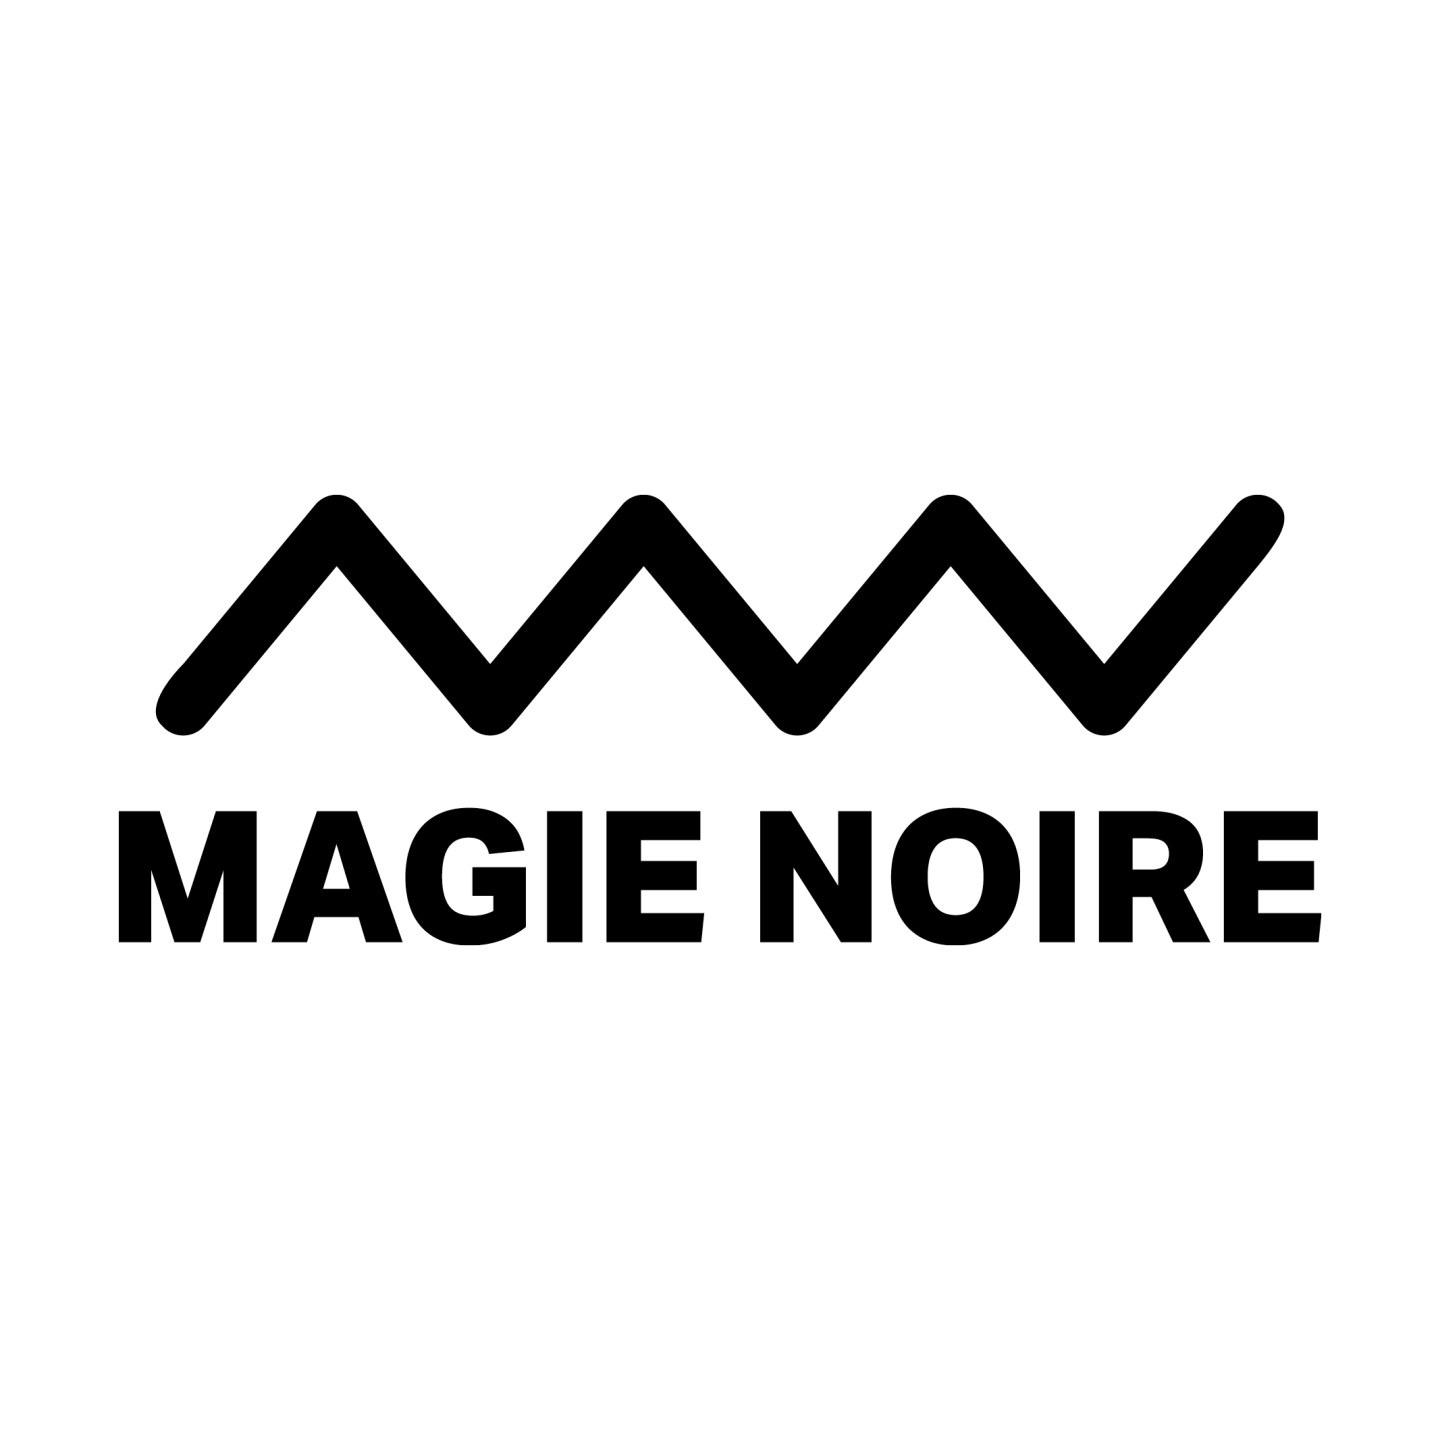 https://static.ra.co/images/promoter/fr-magienoire.jpg?dateUpdated=1639655869417